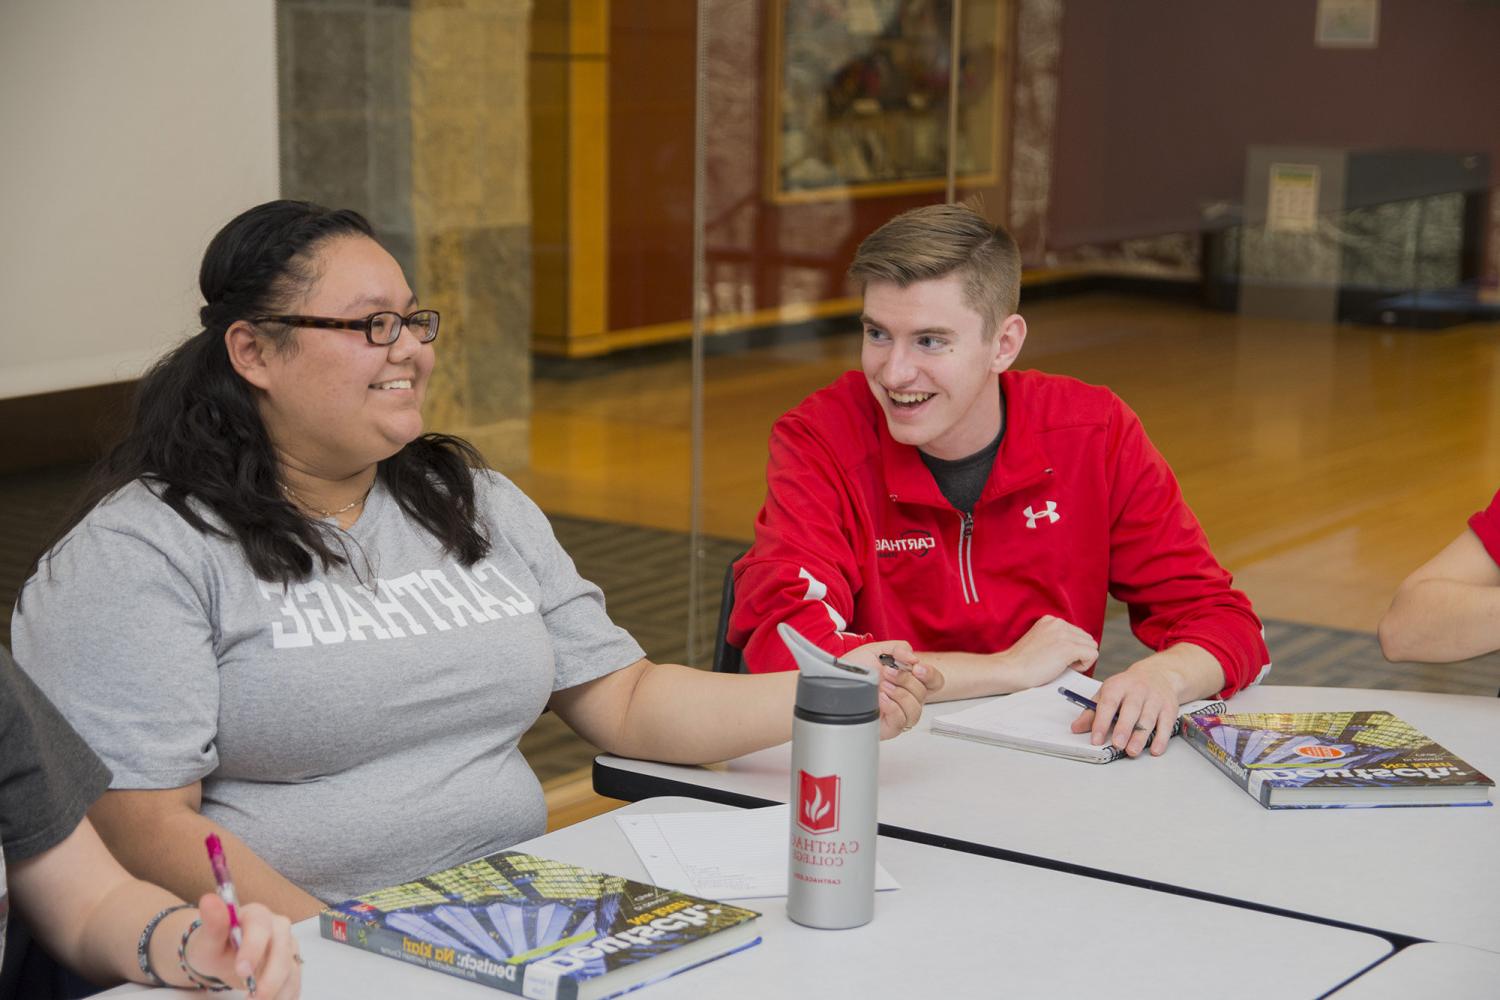 At Carthage, students are encouraged to take courses outside of their major, to pursue new passio...